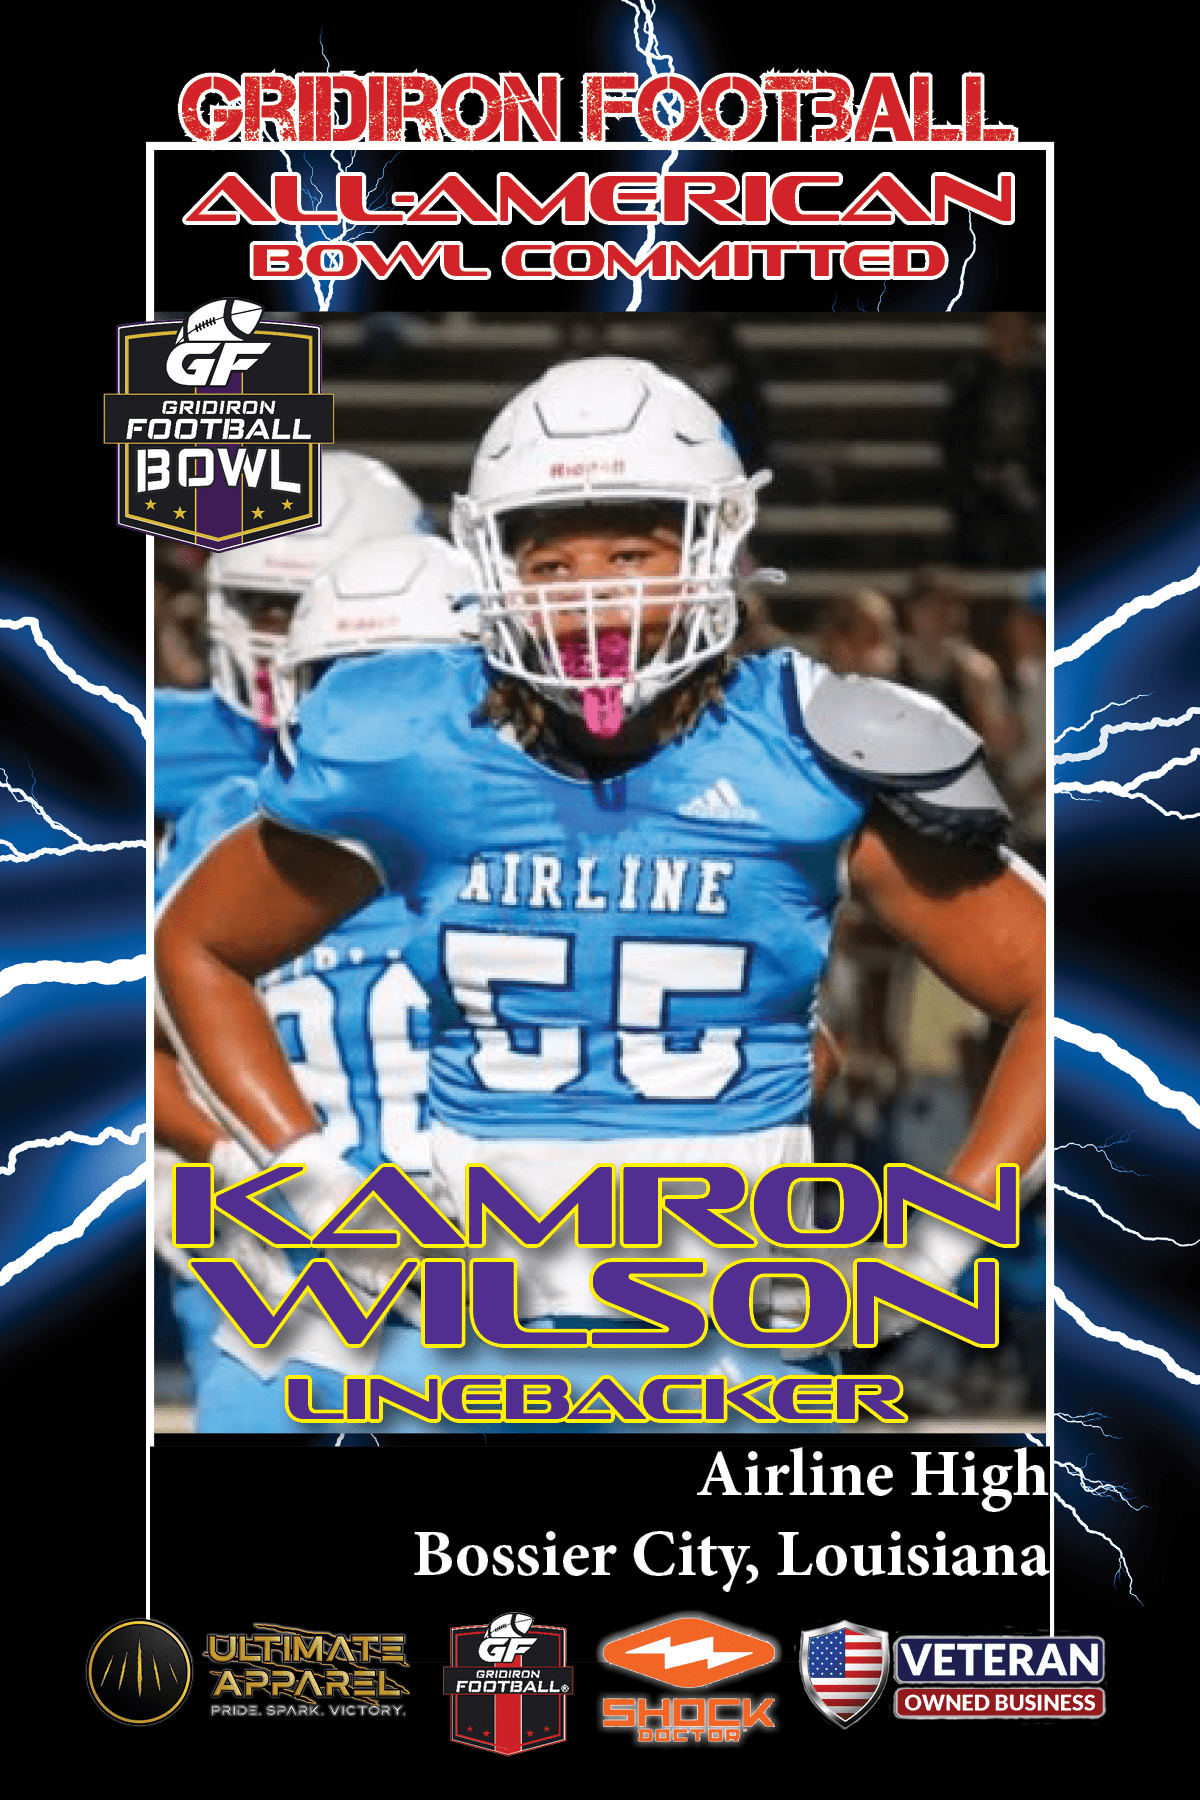 BREAKING NEWS: Airline High School (Bossier City, LA) LB Kamron Wilson Commits To The Gridiron Football All-American Bowl Game